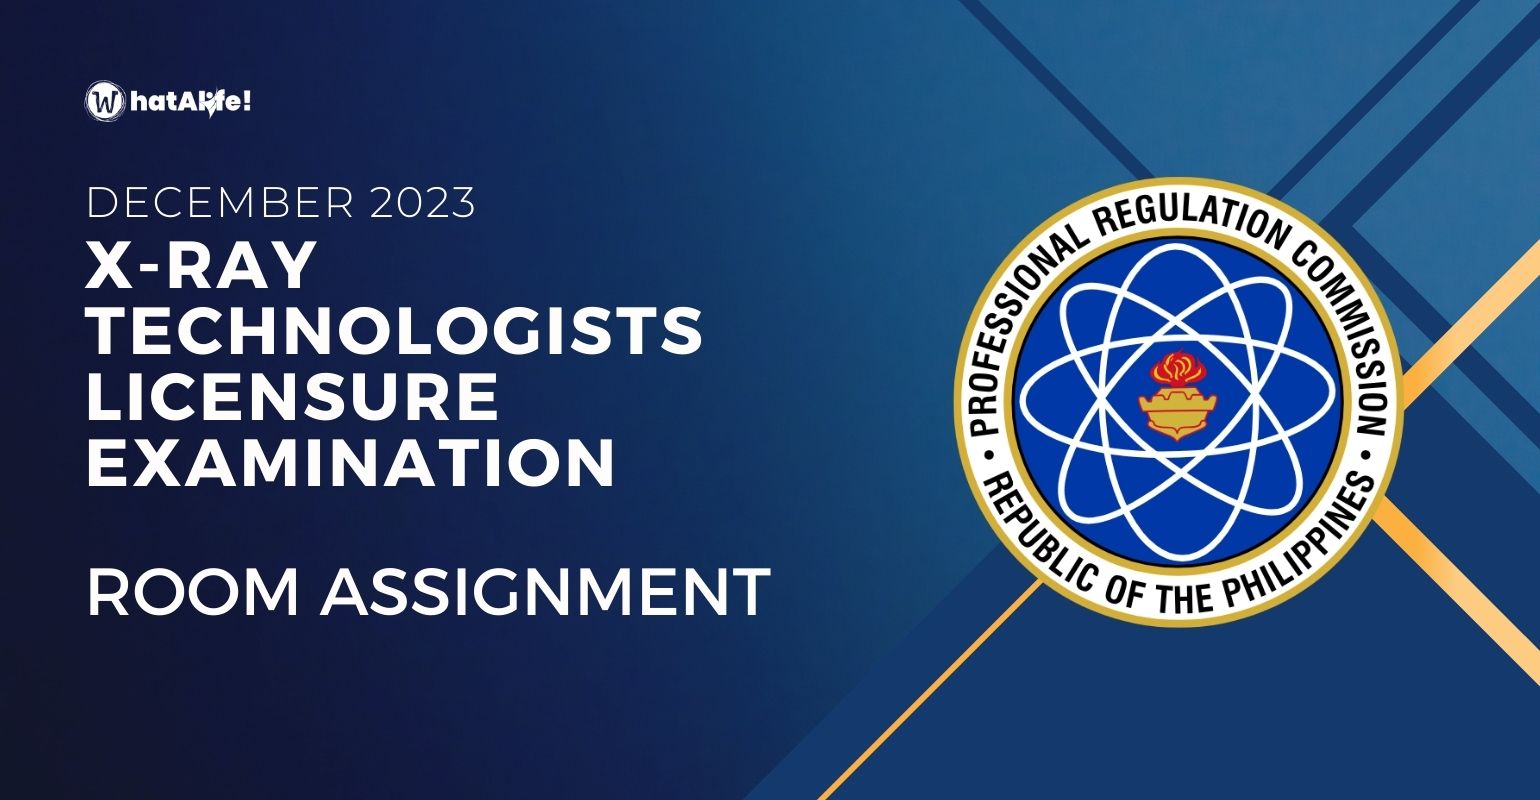 room assignment december 2023 x ray technologists licensure exam